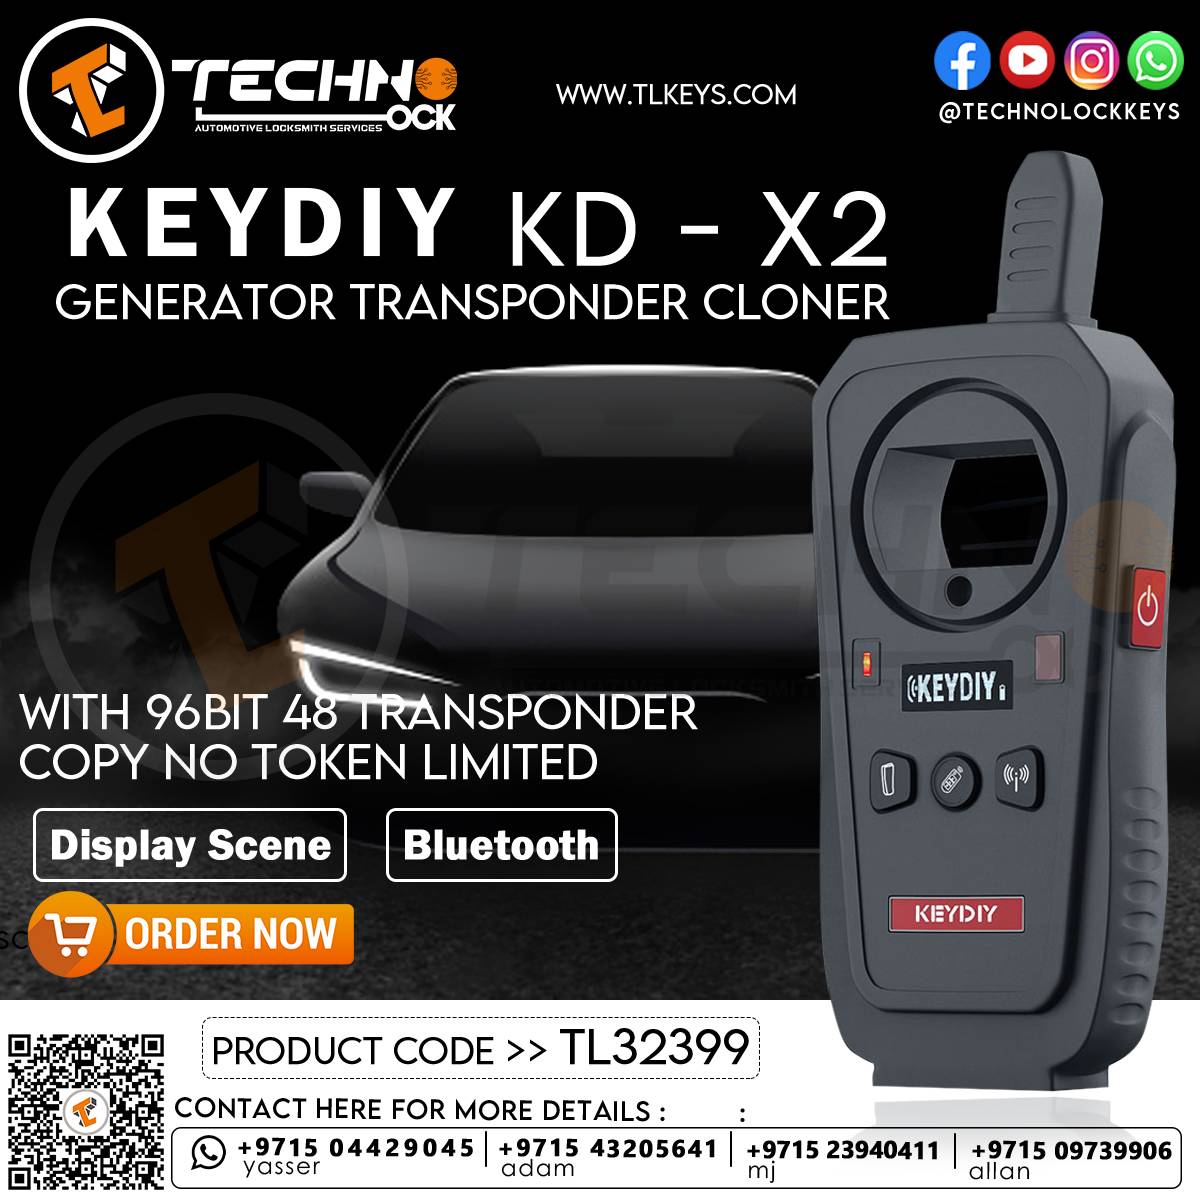  KDX2 is a multi-function auto key programmer